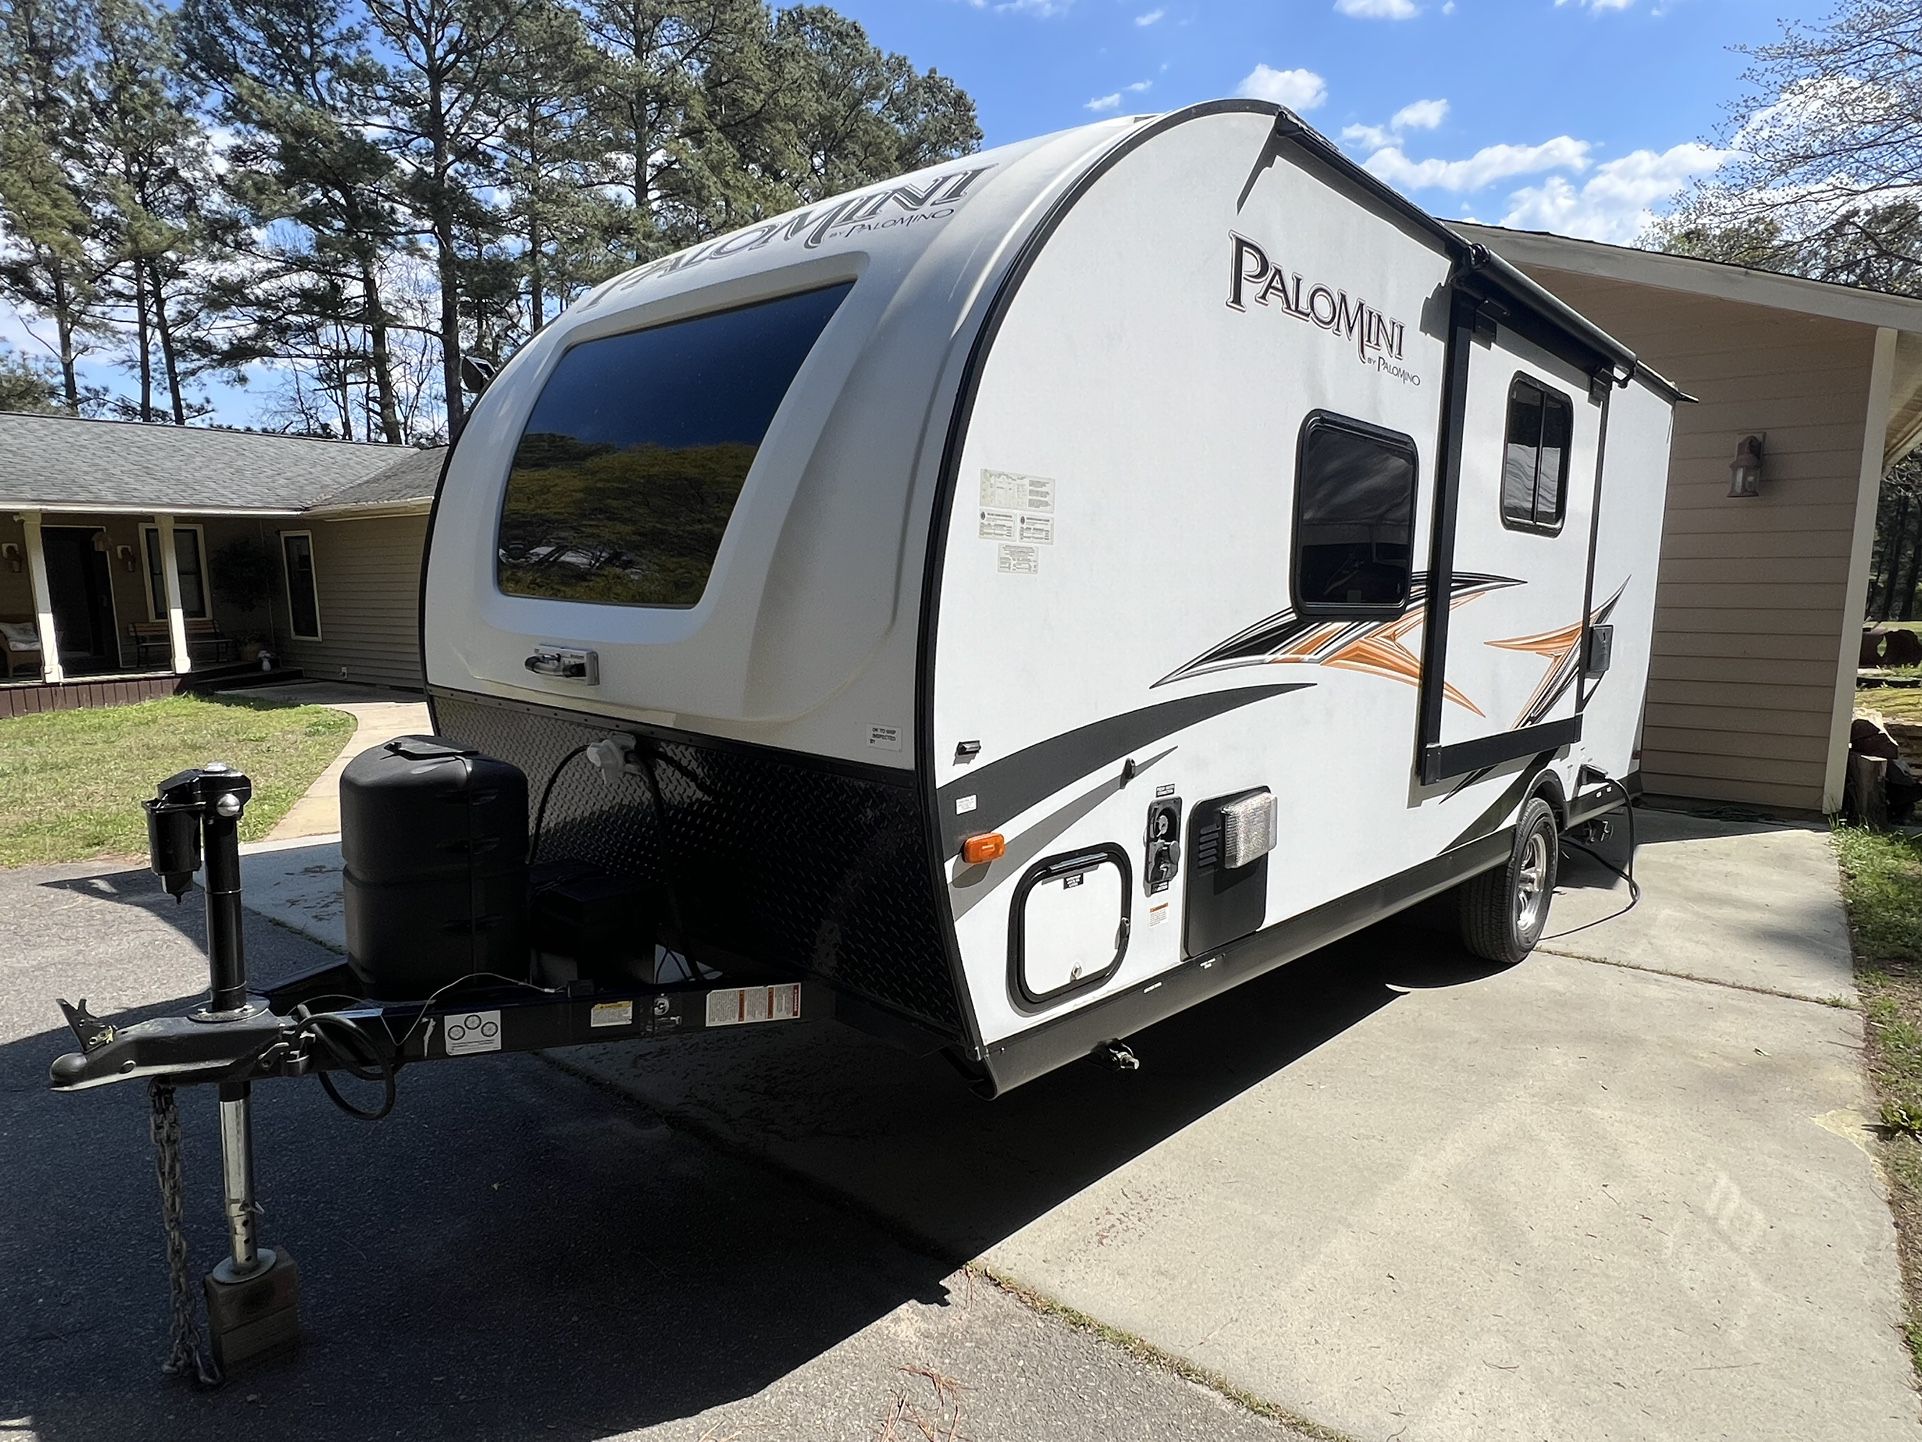 MUST SEE!  2019 18’ Palomini “Off Road” Camper / RV - excellent condition!